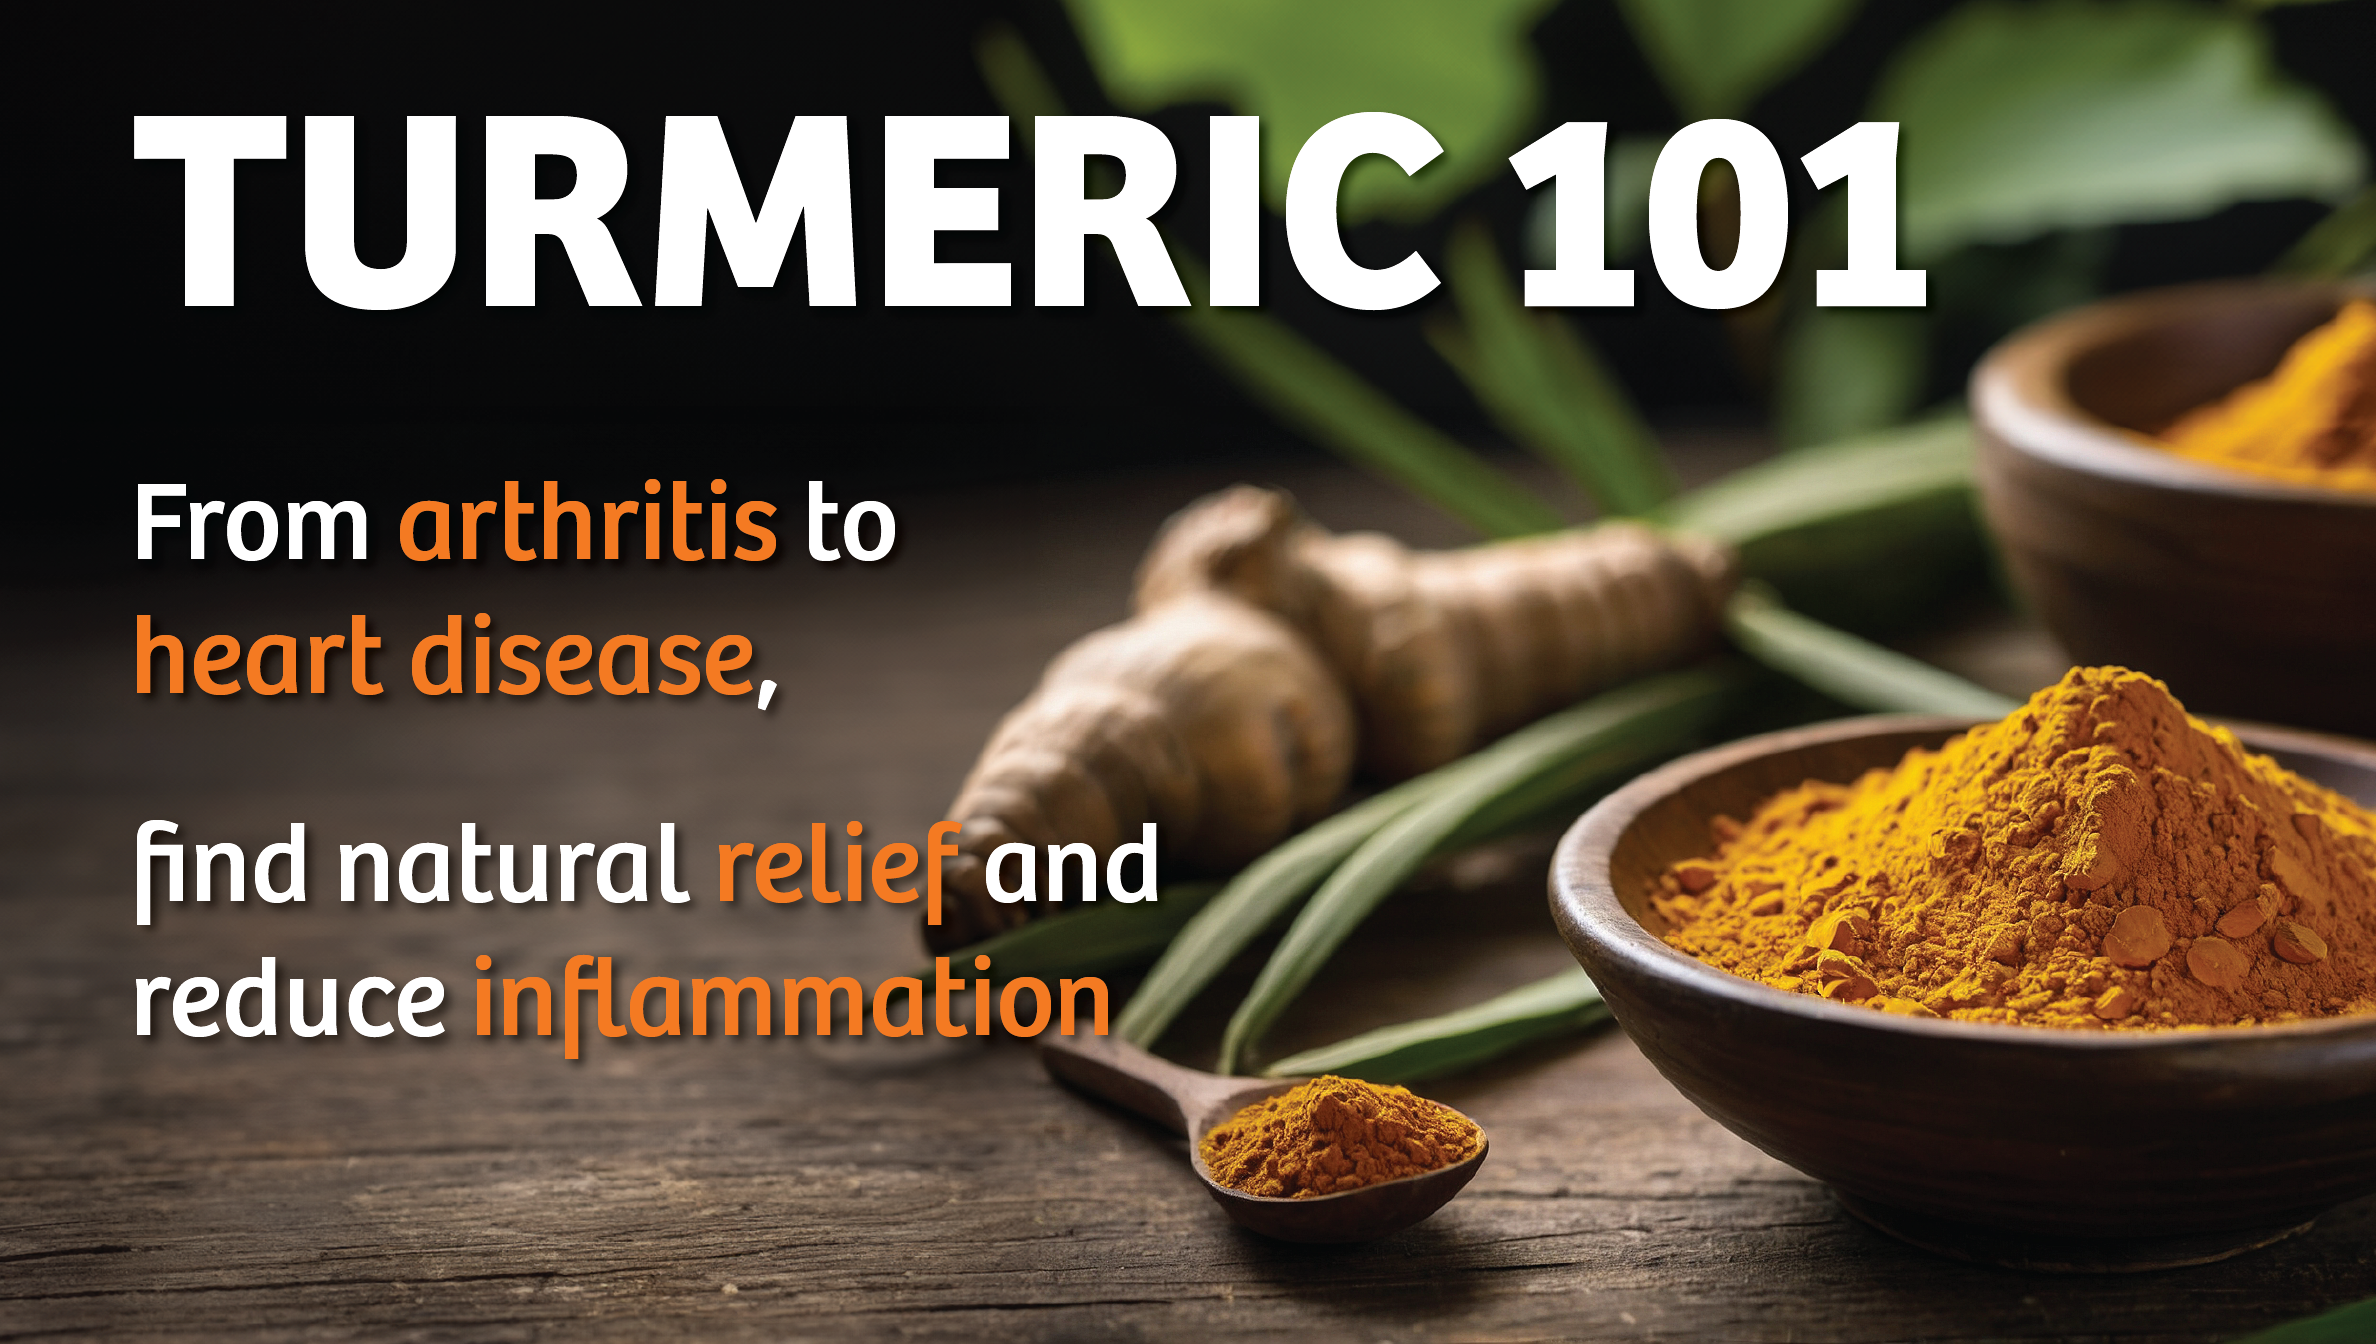 Turmeric 101: From arthritis to heart disease, find natural relief and reduce inflammation